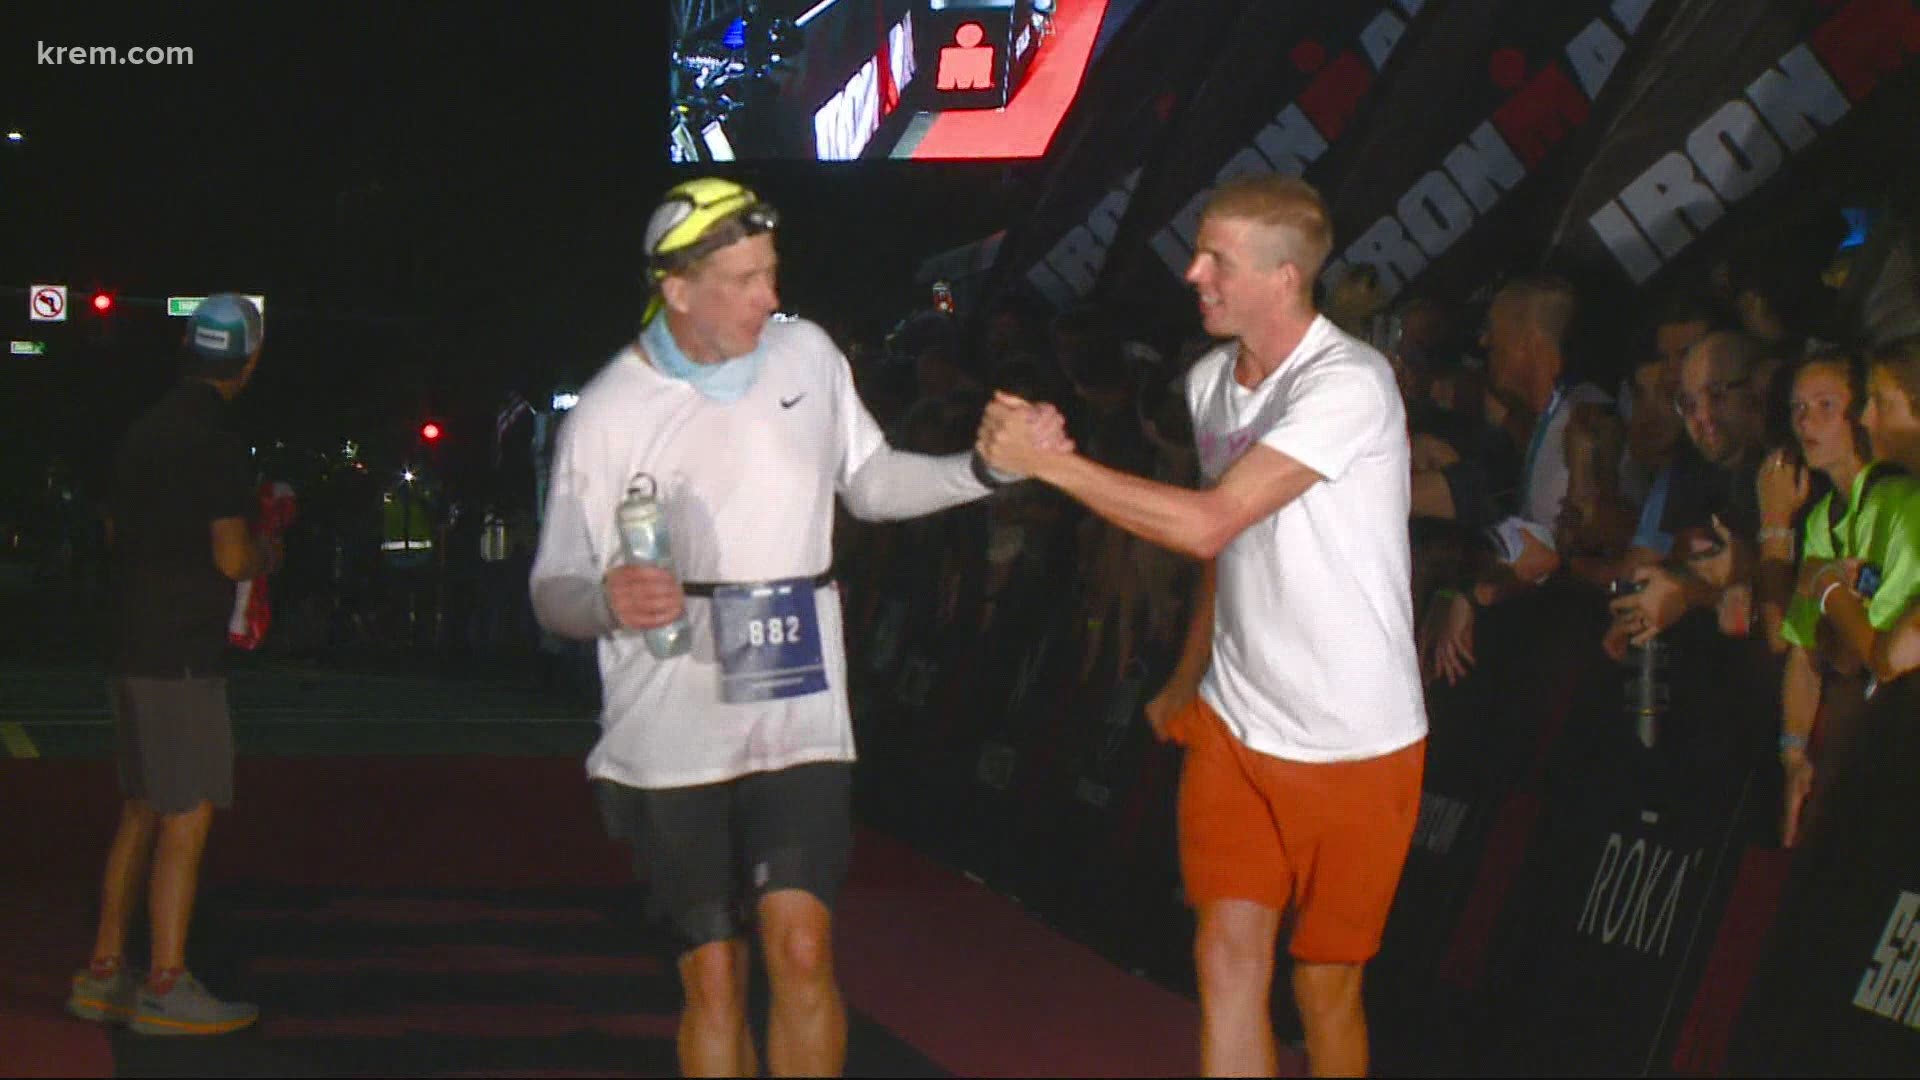 First place winner returns to the Ironman finish line to meet the last athlete as they finish the race